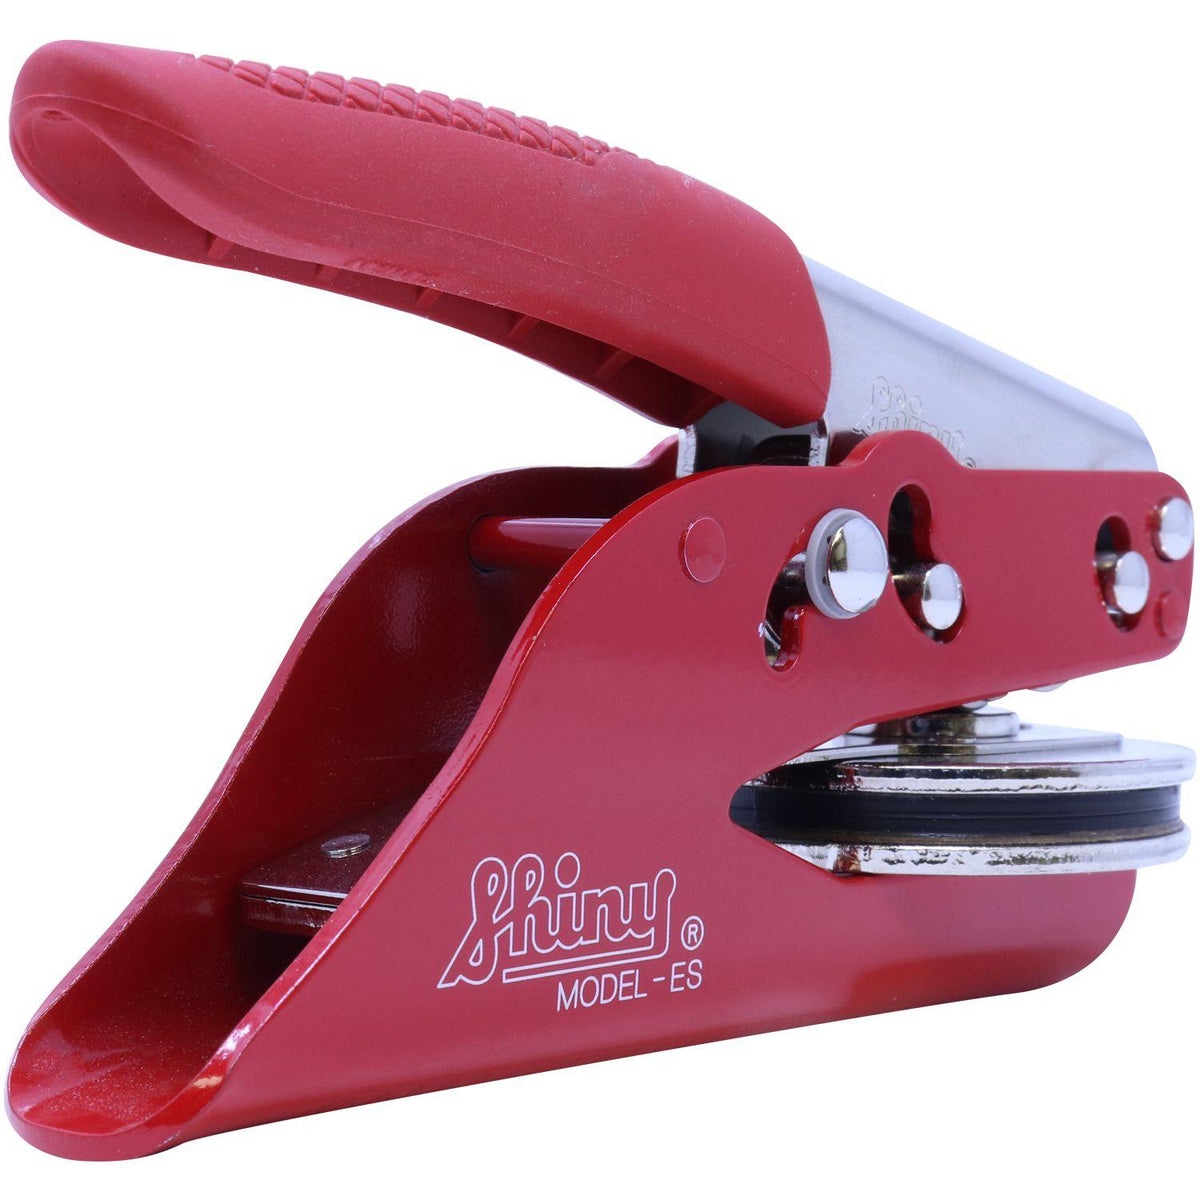 Public Weighmaster Red Soft Seal Embosser - Engineer Seal Stamps - Embosser Type_Handheld, Embosser Type_Soft Seal, Type of Use_Professional